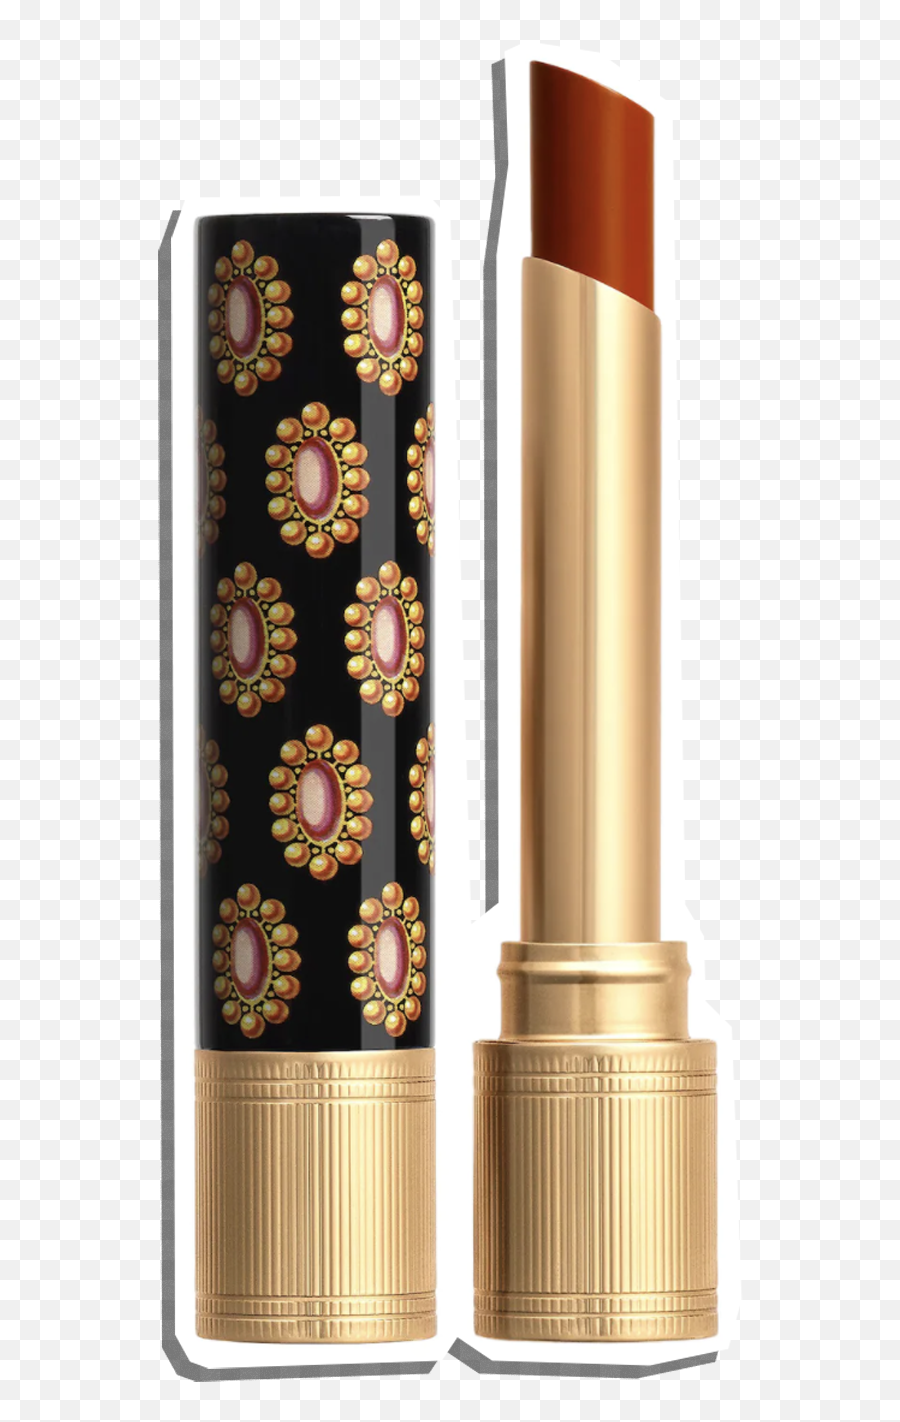 14 Best Lipsticks In 2021 According To Industry Pros - Gucci Lipstick 515 Swatch Png,Maybelline Color Icon